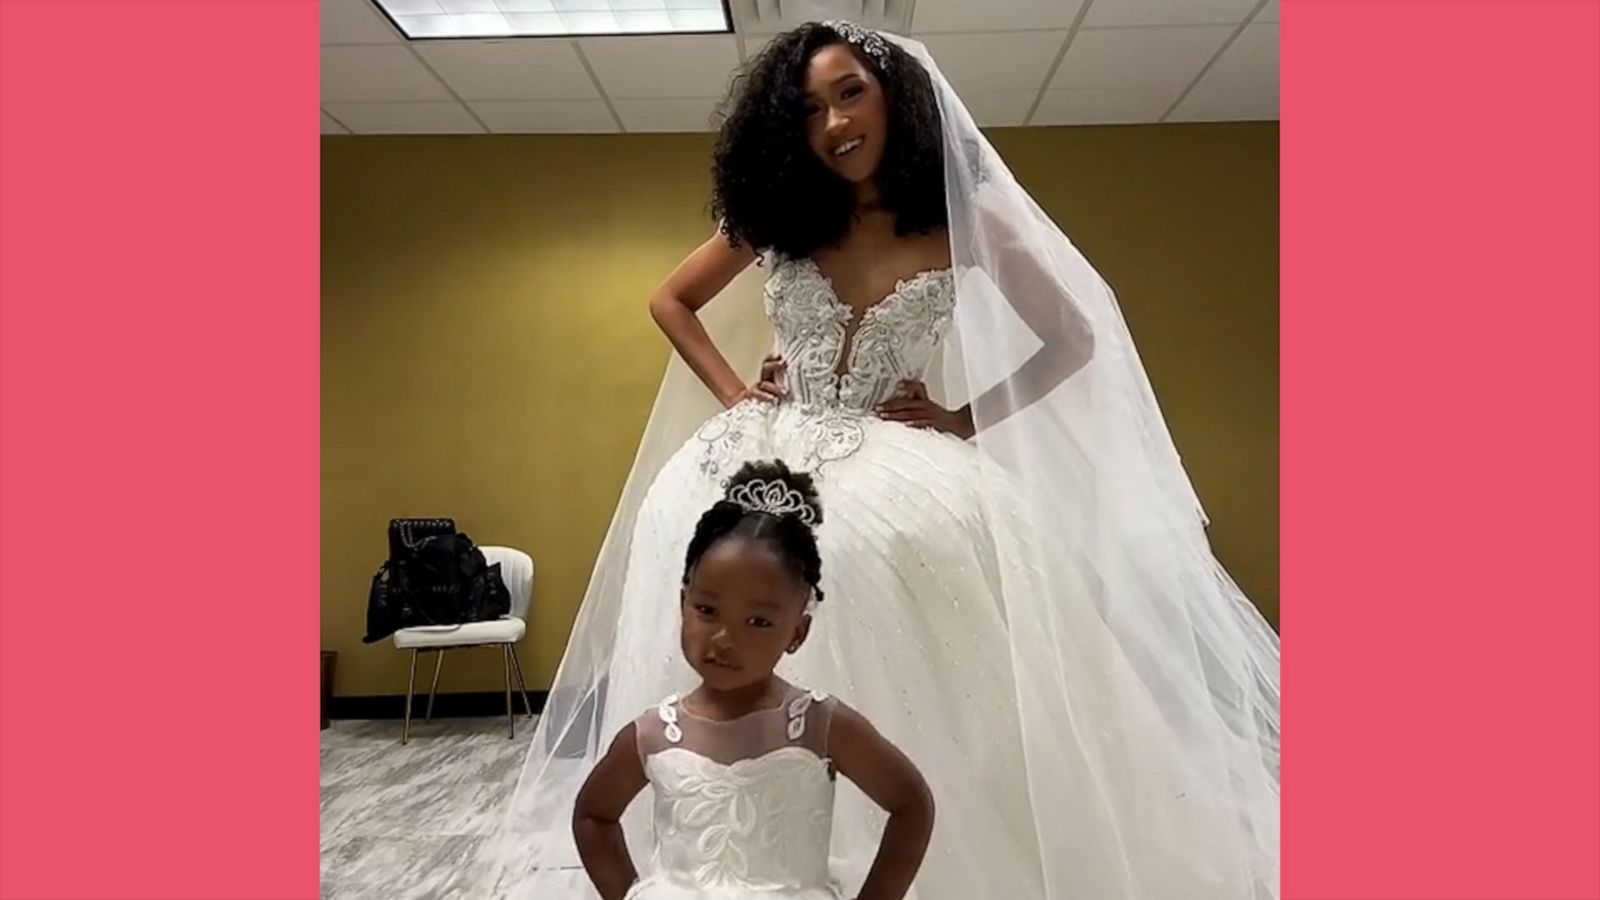 VIDEO: Bride and her daughter share precious moment before wedding